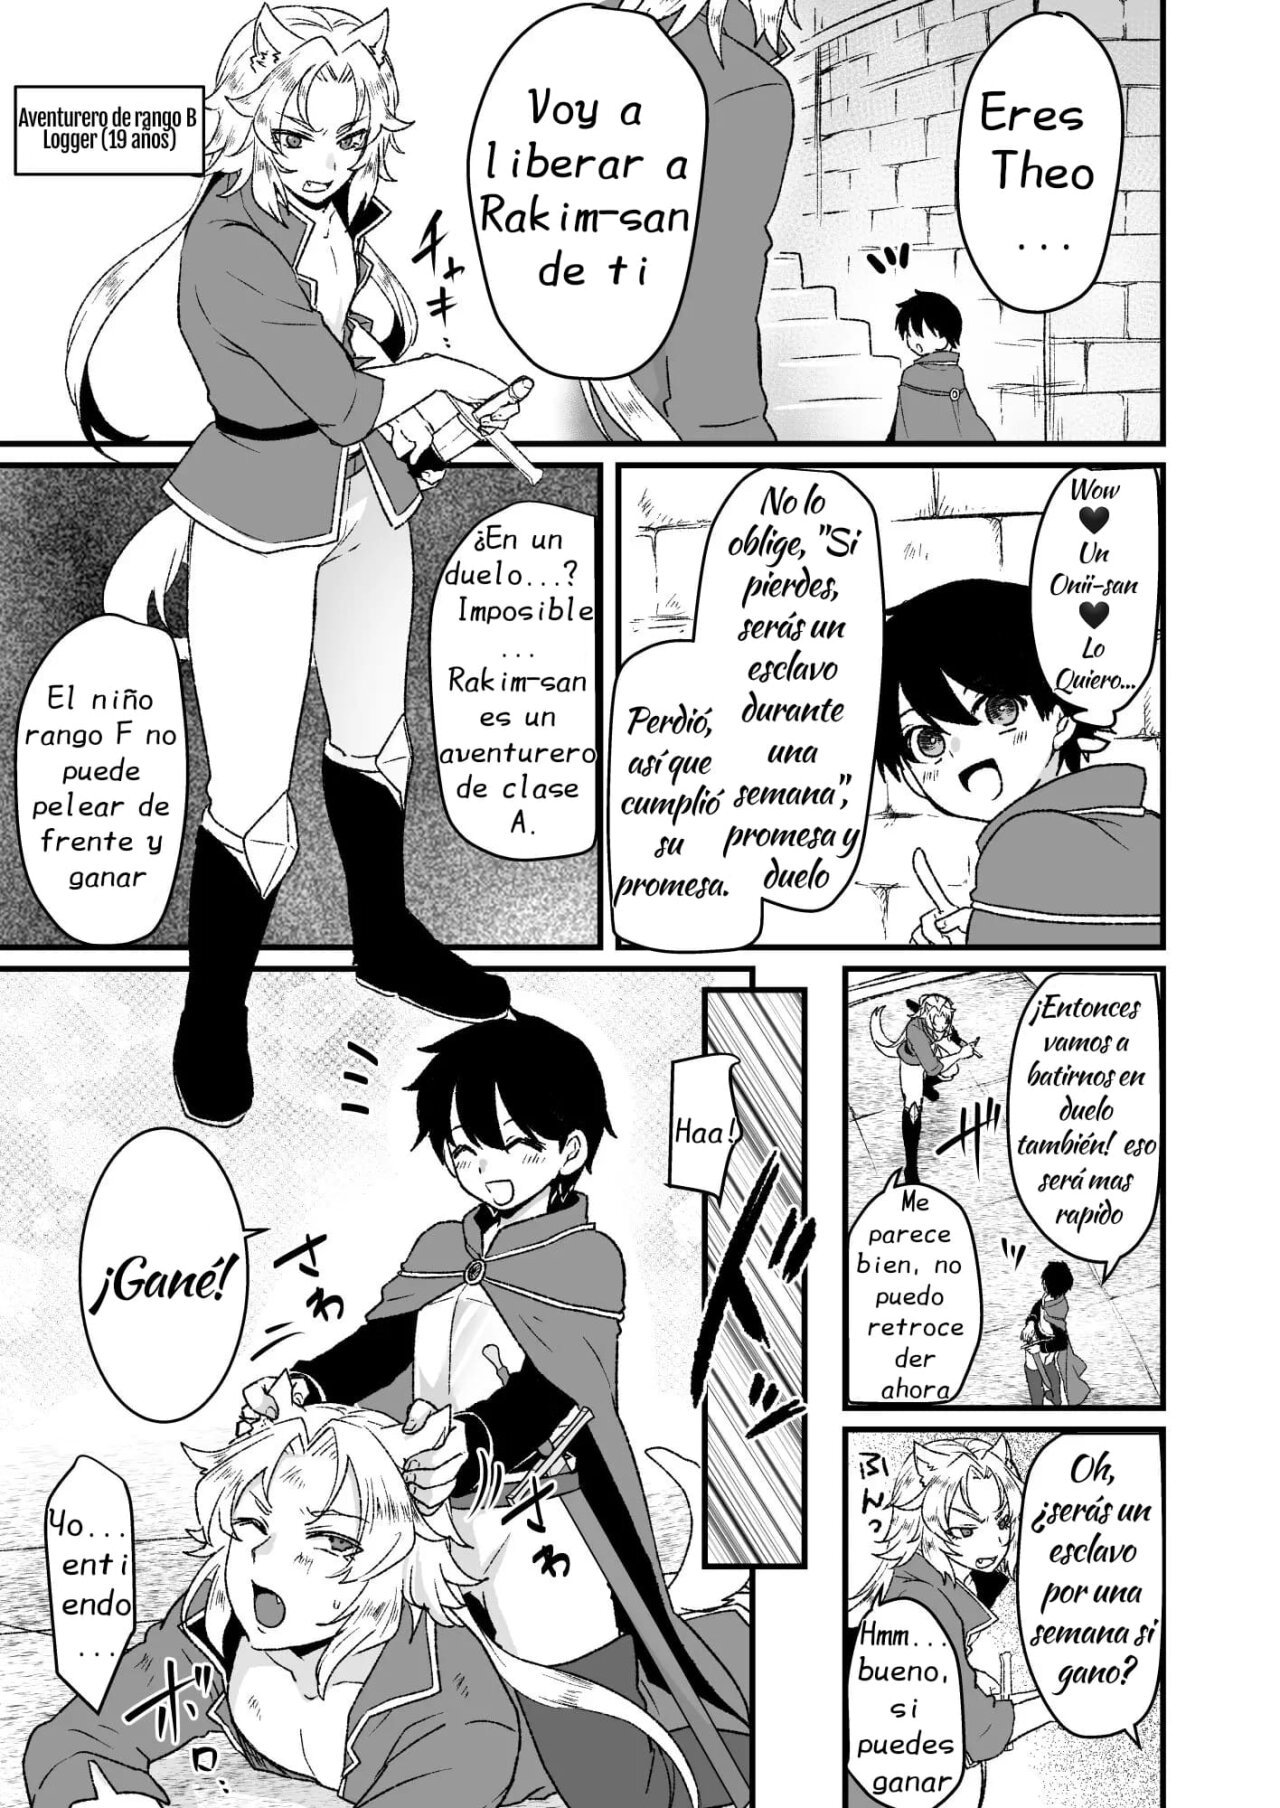 Manga of the strongest shota and female brothers(completo) - 8